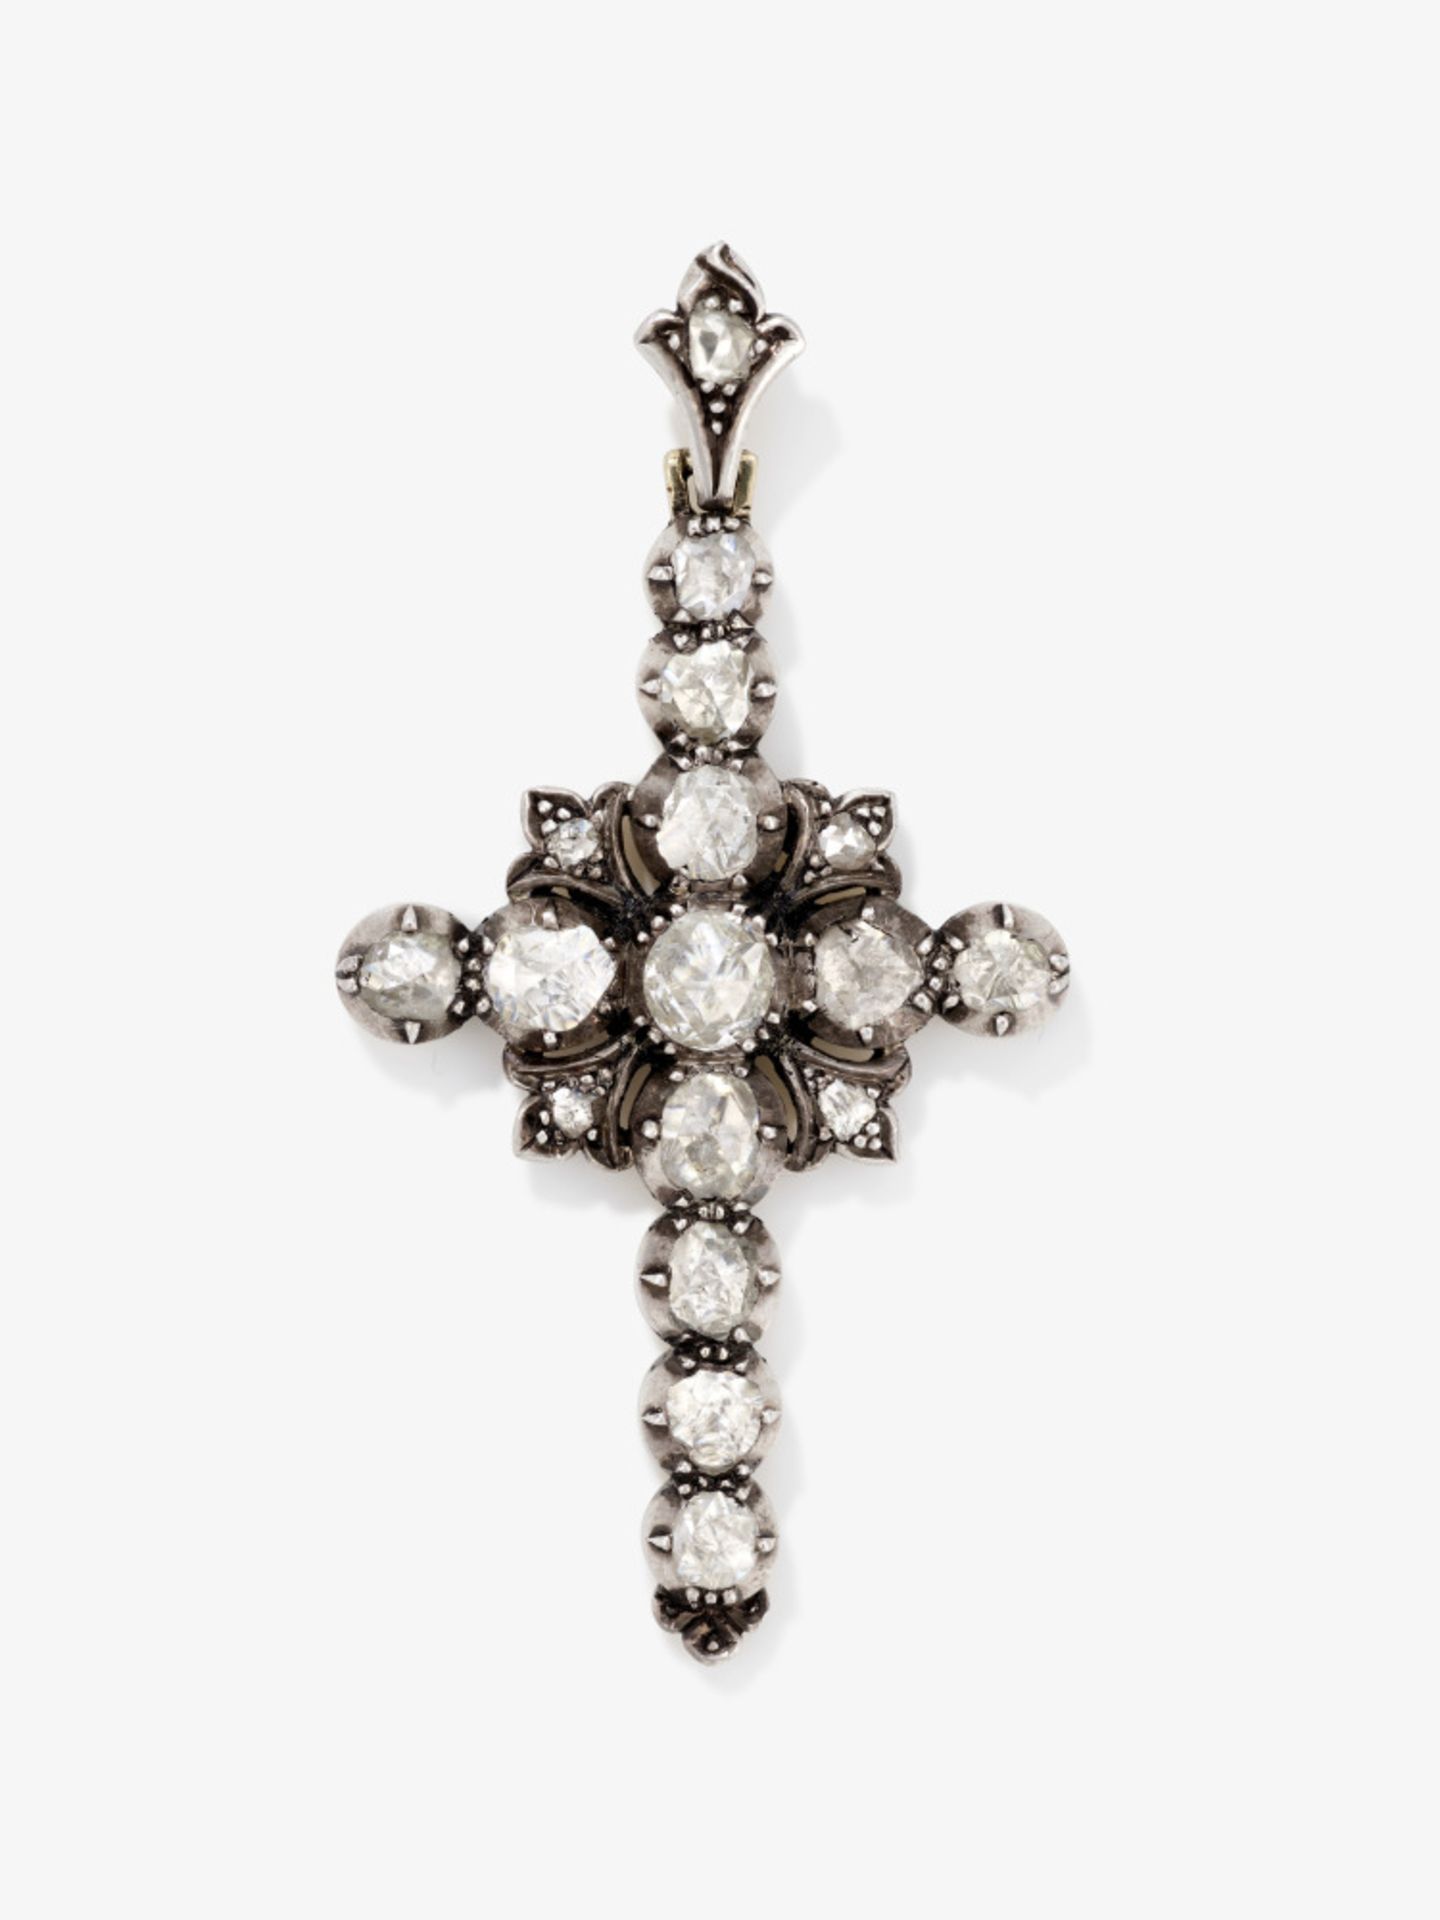 A cross pendant with diamonds - Probably France, end of the 18th century